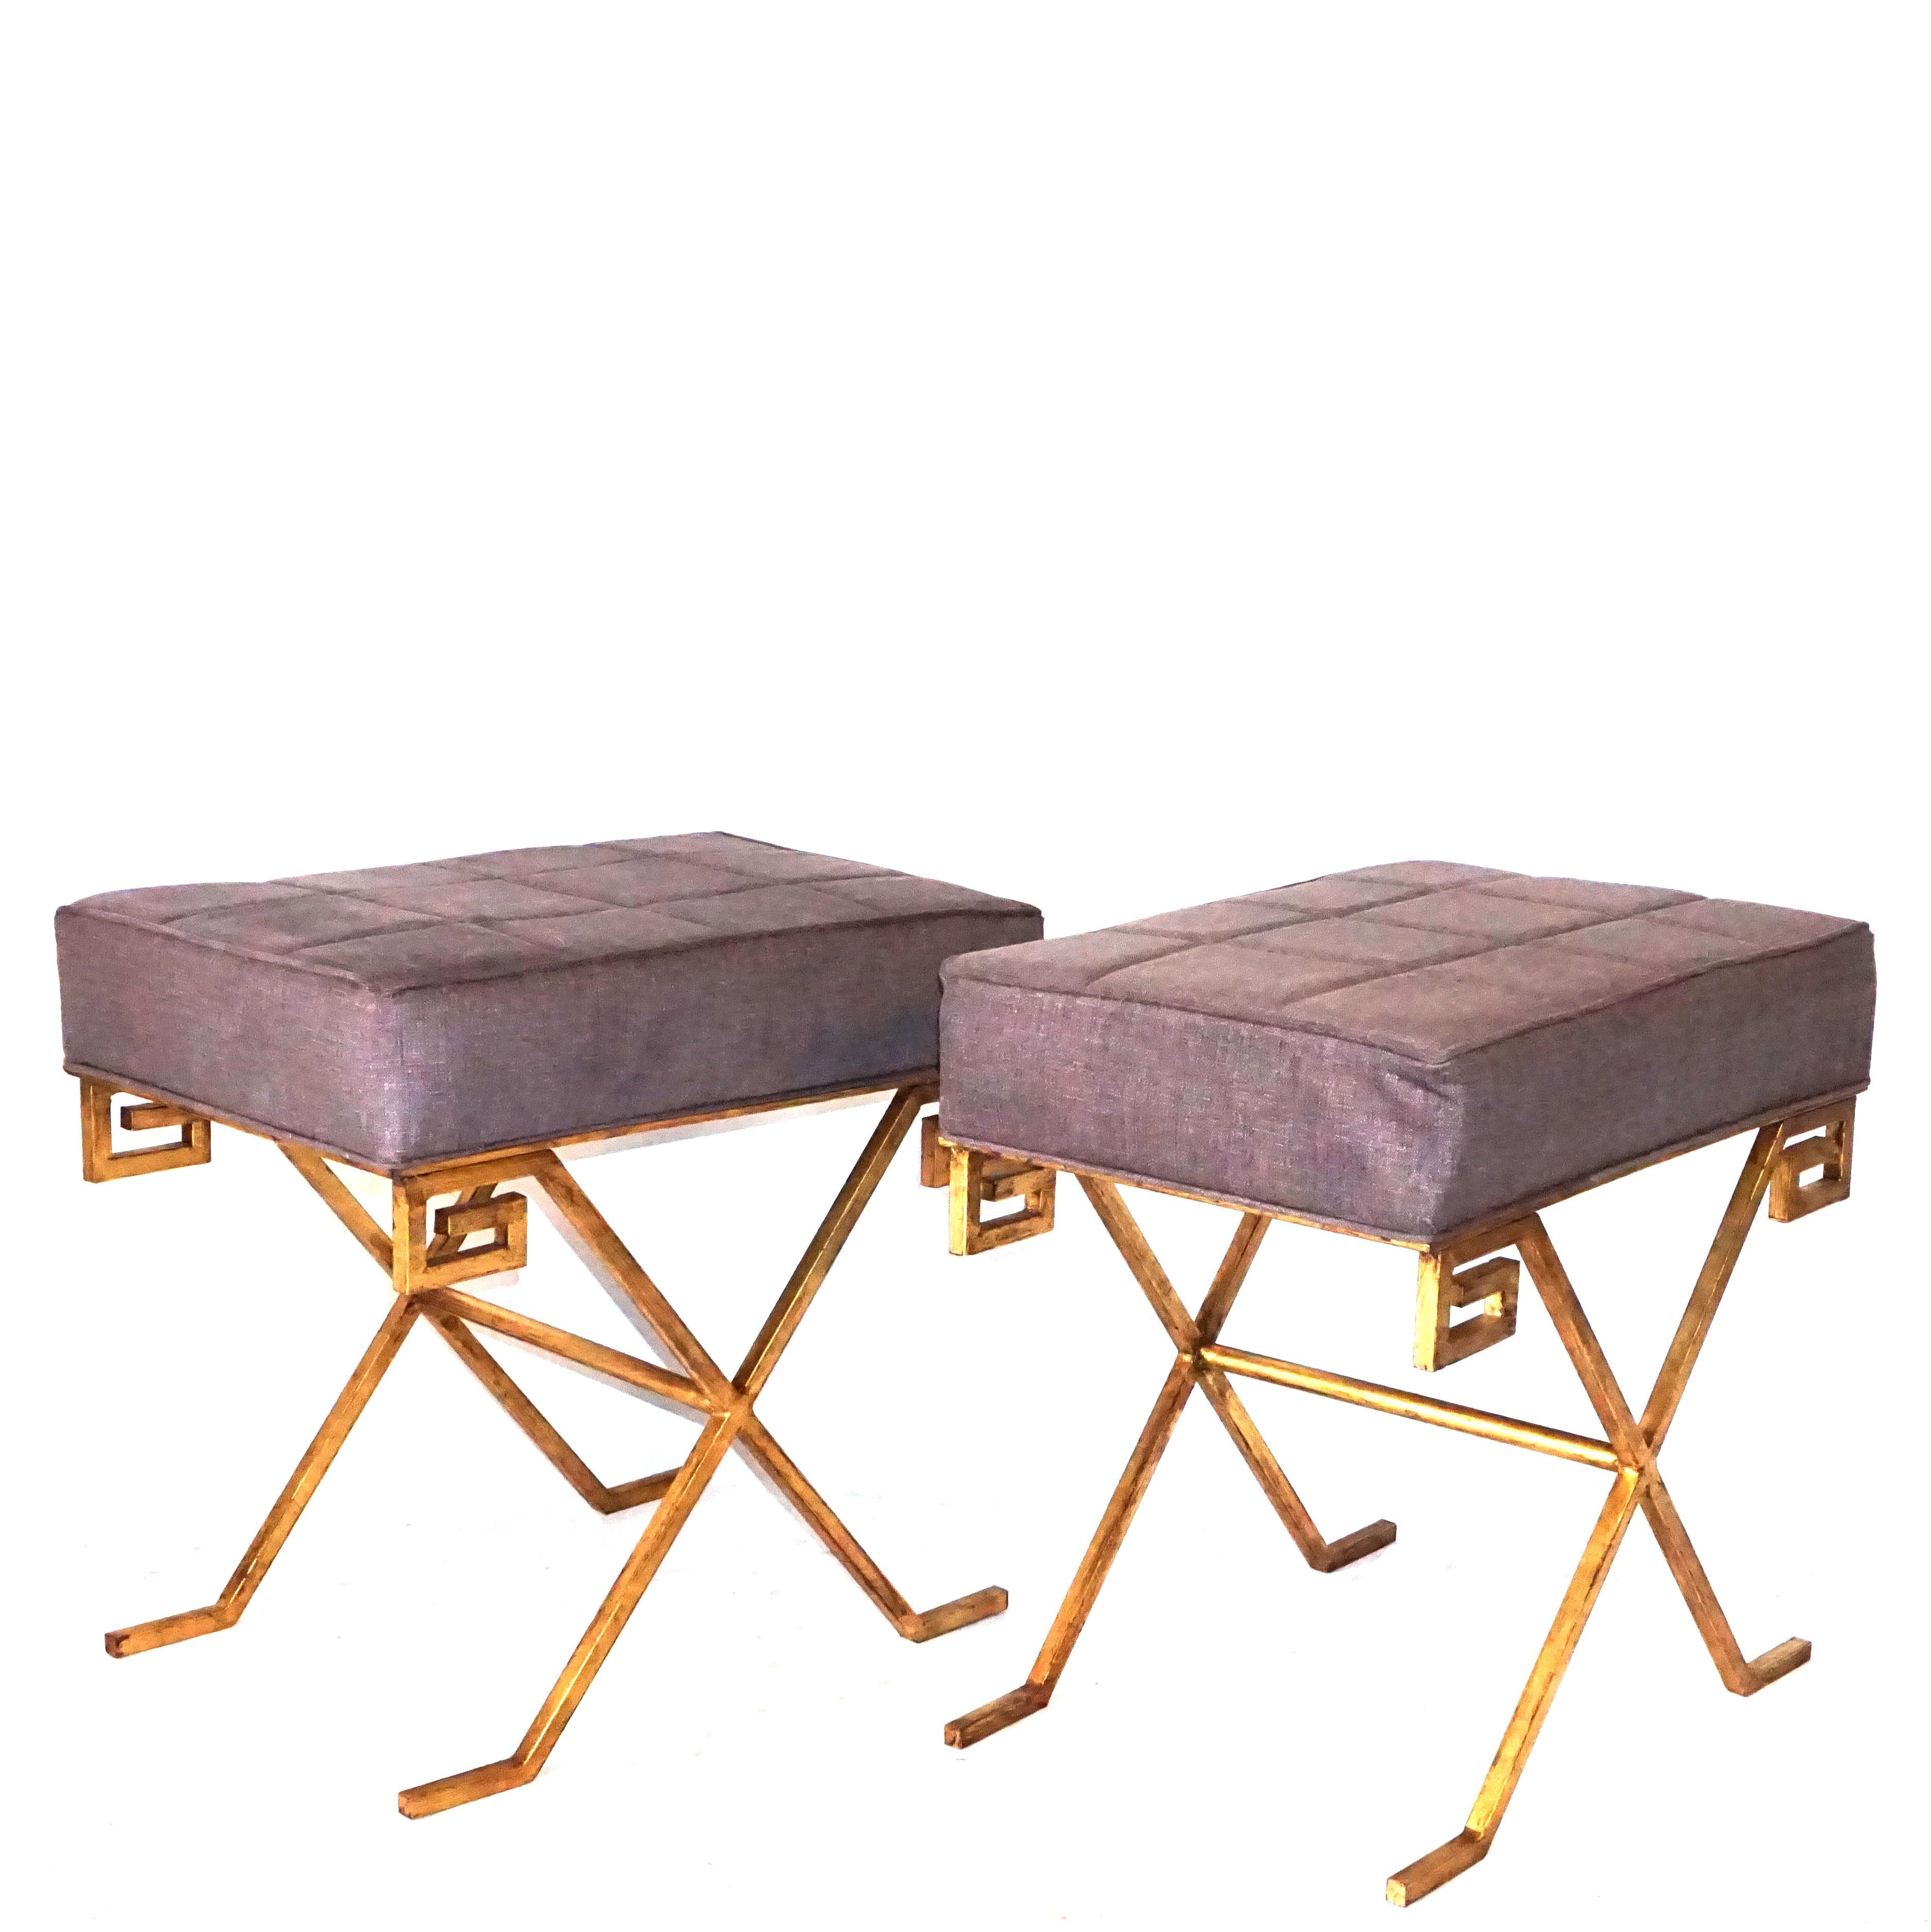 A vintage Art Deco pair of French gilt iron benches, upholstered with seat support on an X-form base with a Greek key design. Designed by Jean Michel Frank, in good condition. Wear consistent with age and use, circa 1920-1935, France.

Jean-Michel